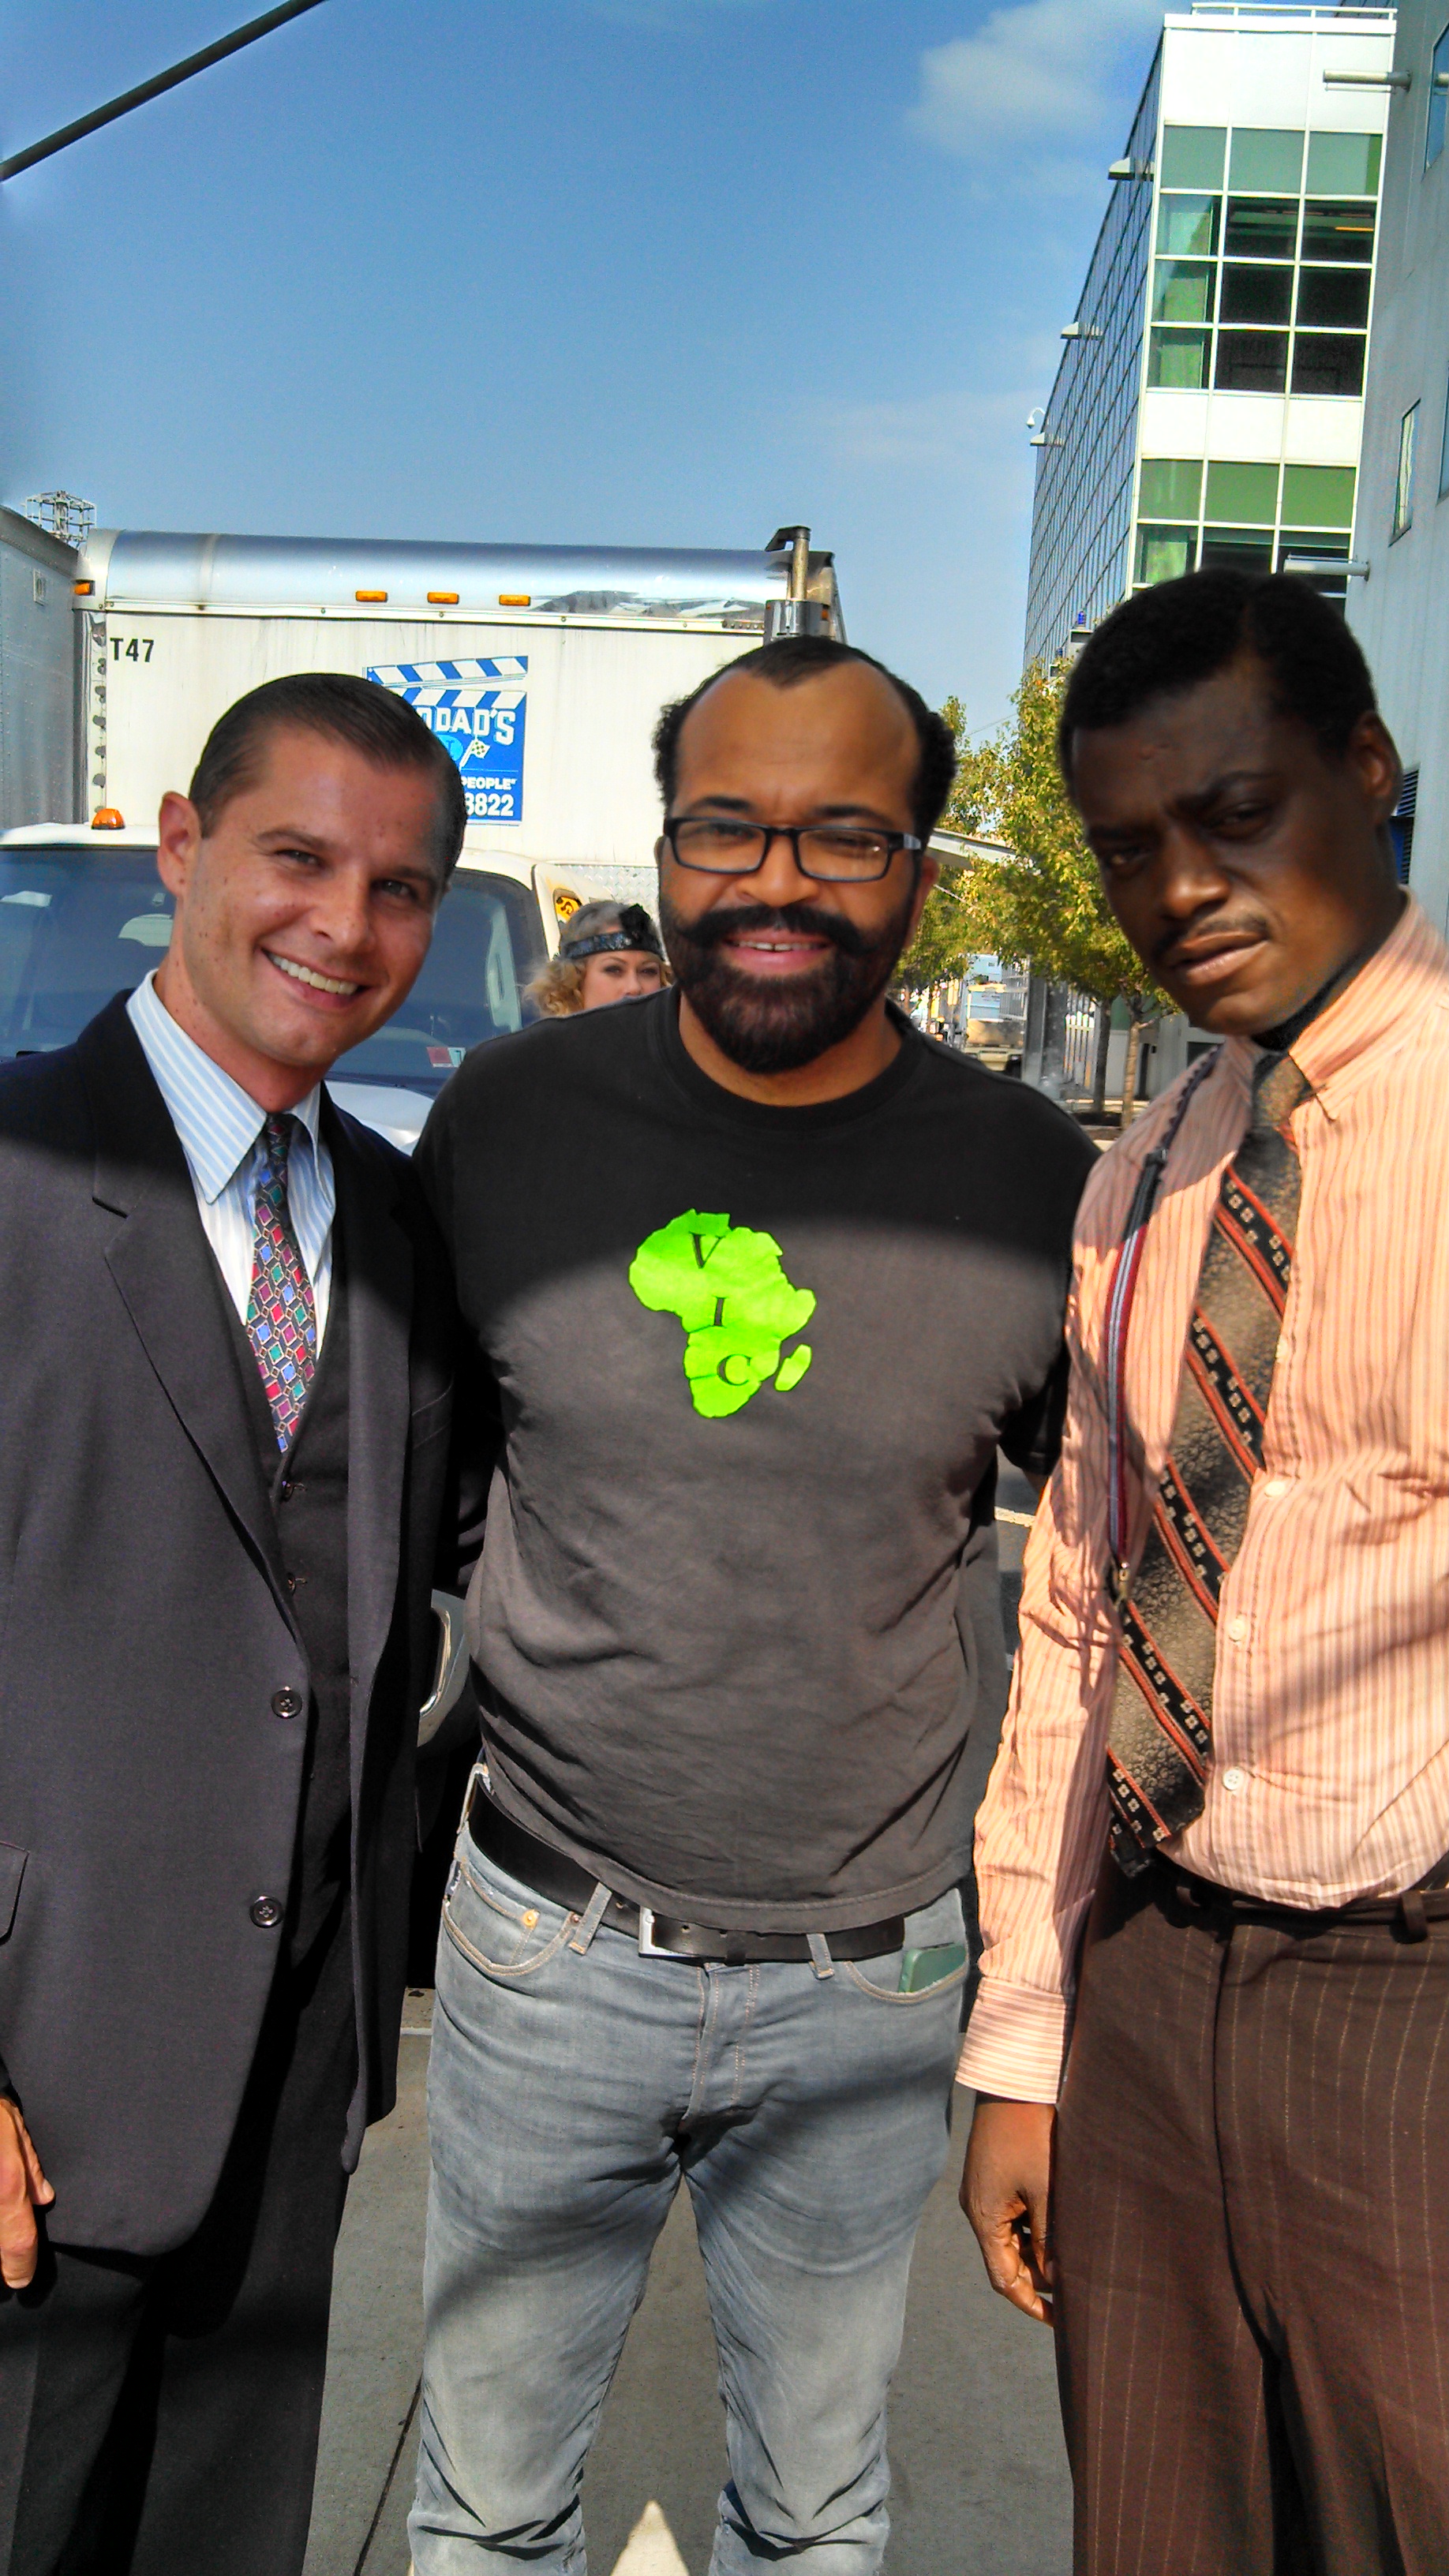 Jeffrey Wright as Valentin Narcisse and Jerry Lobrow on Boardwalk Empire